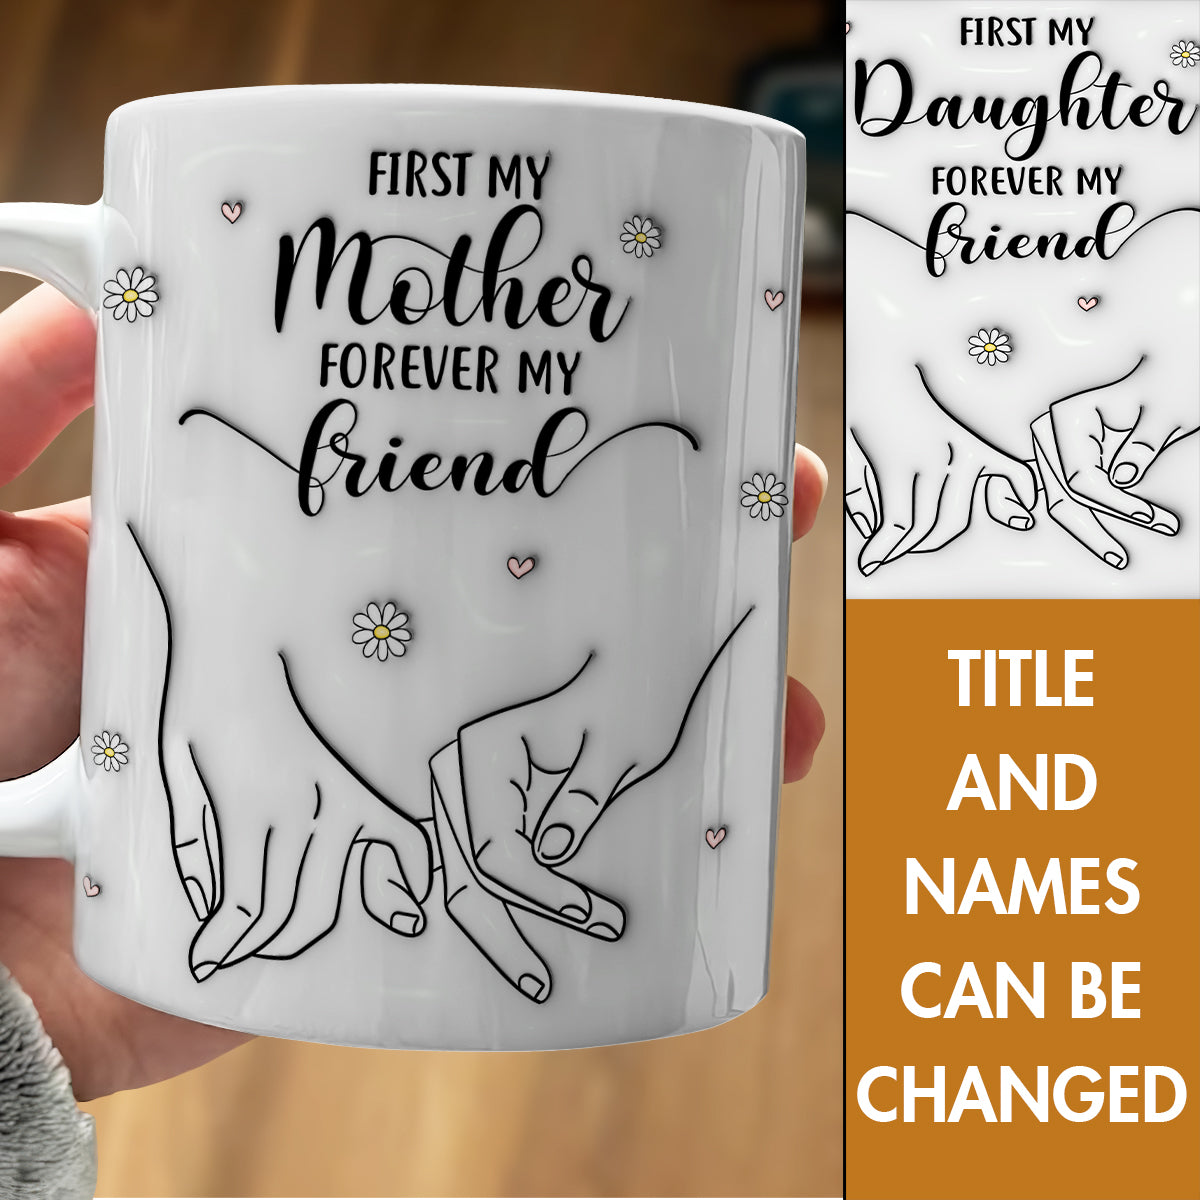 Mother - First My Mother Forever My Friend - Family Personalized Mug